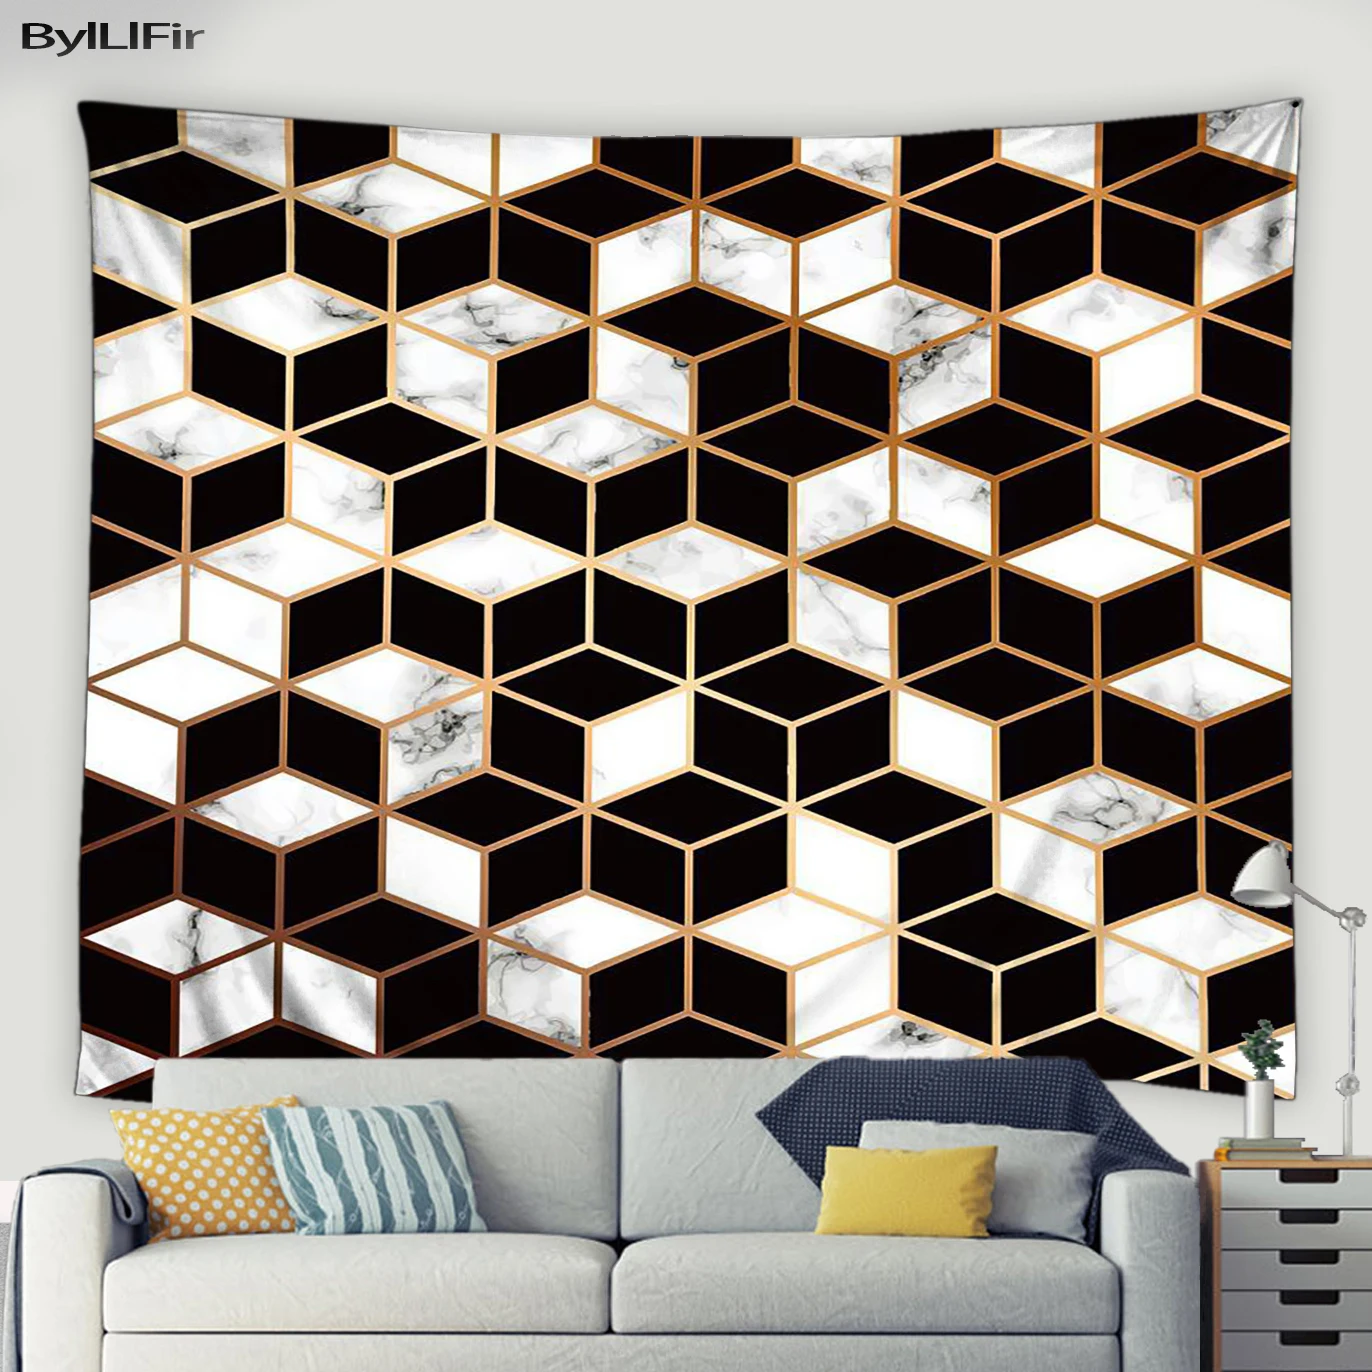 

3D Geometric Vision Tapestry Wall Hanging Black White Abstract Marble Pattern Bedroom Mural Dorm Room Art Decor Wall Blanket